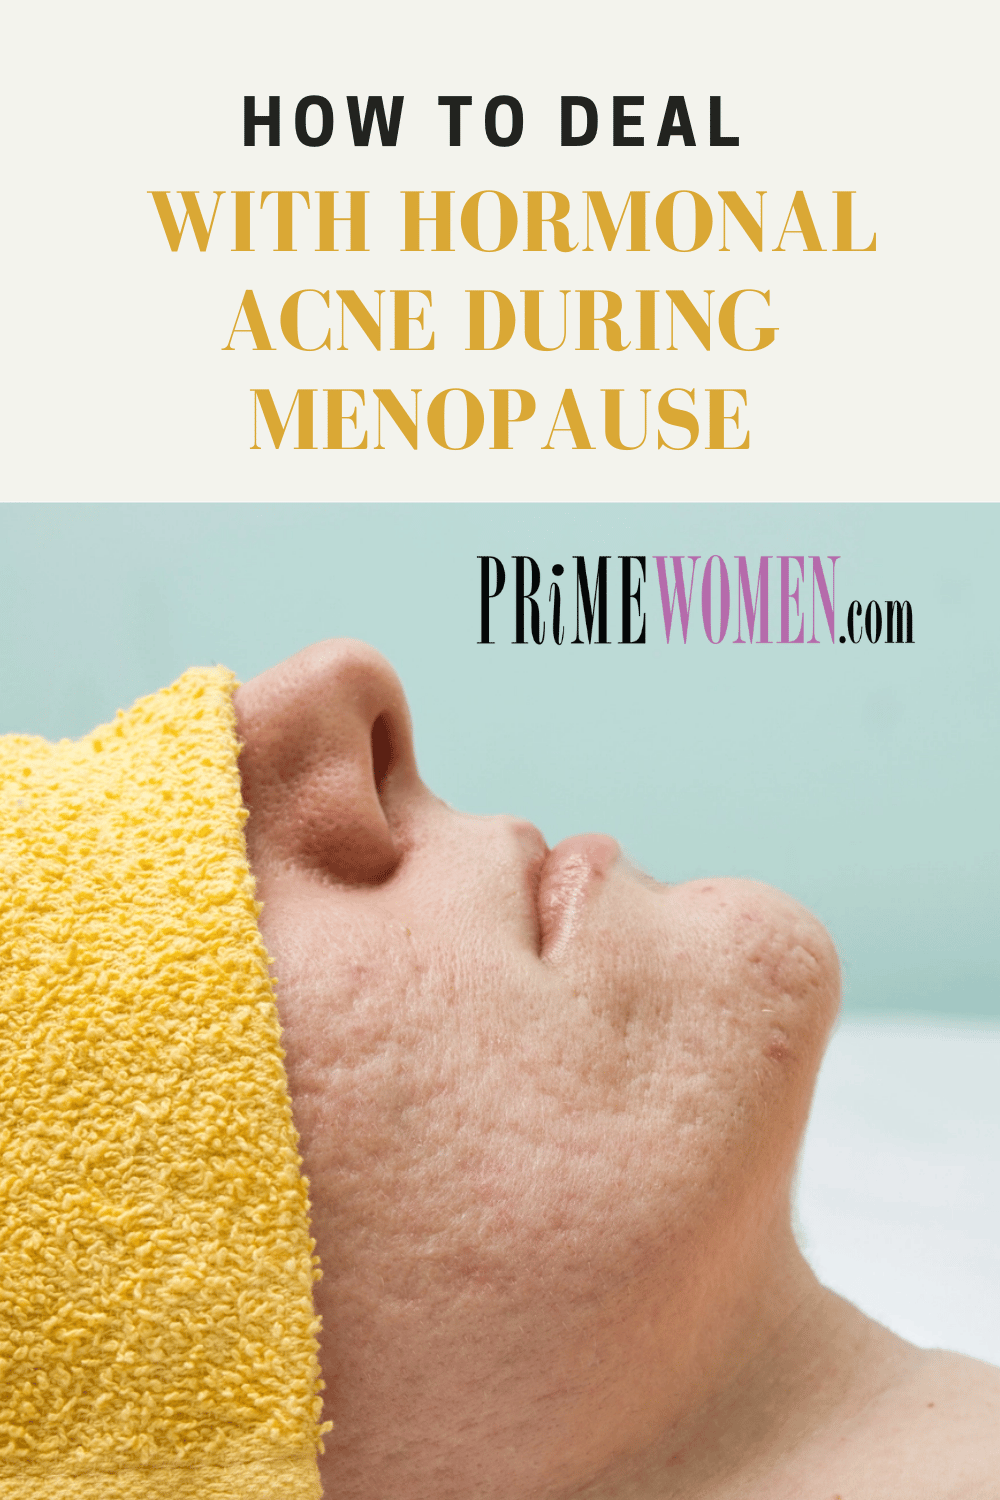 How to deal with homonal acne during menopause